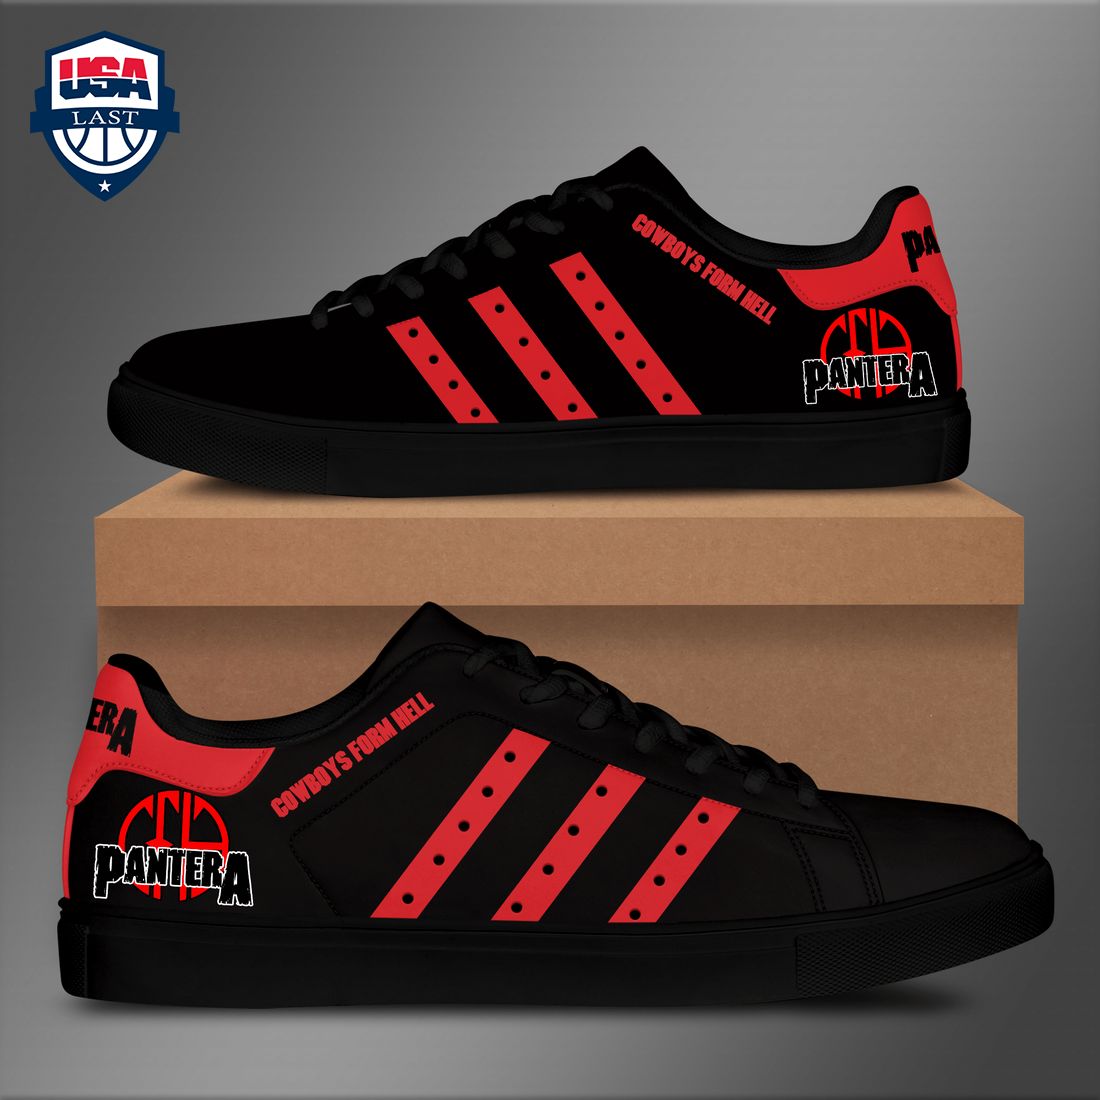 pantera-cowboys-from-hell-red-stripes-style-3-stan-smith-low-top-shoes-1-UFyzw.jpg